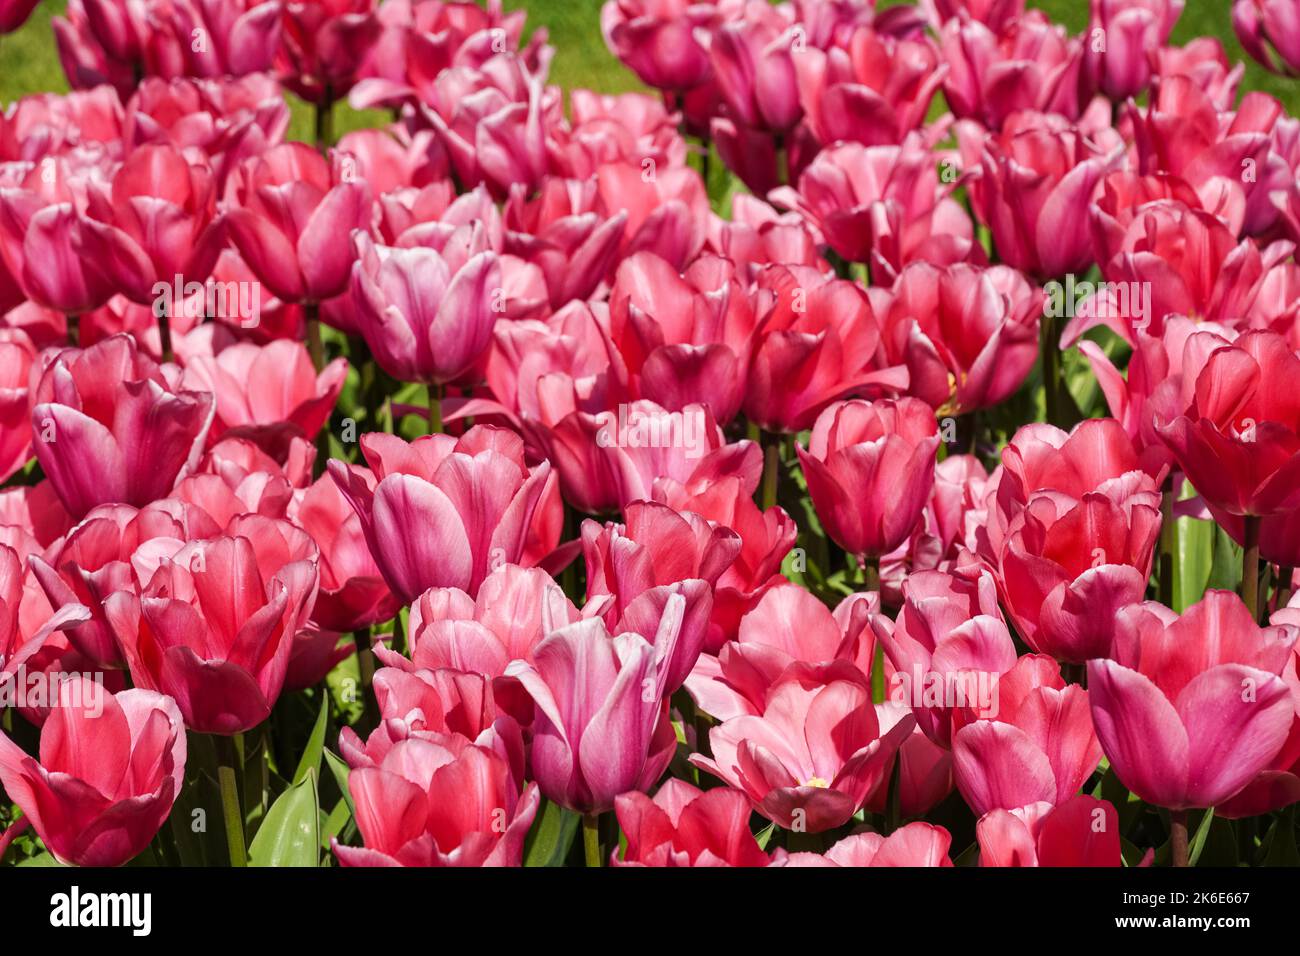 Pink tulips growing on a flowerbed Stock Photo